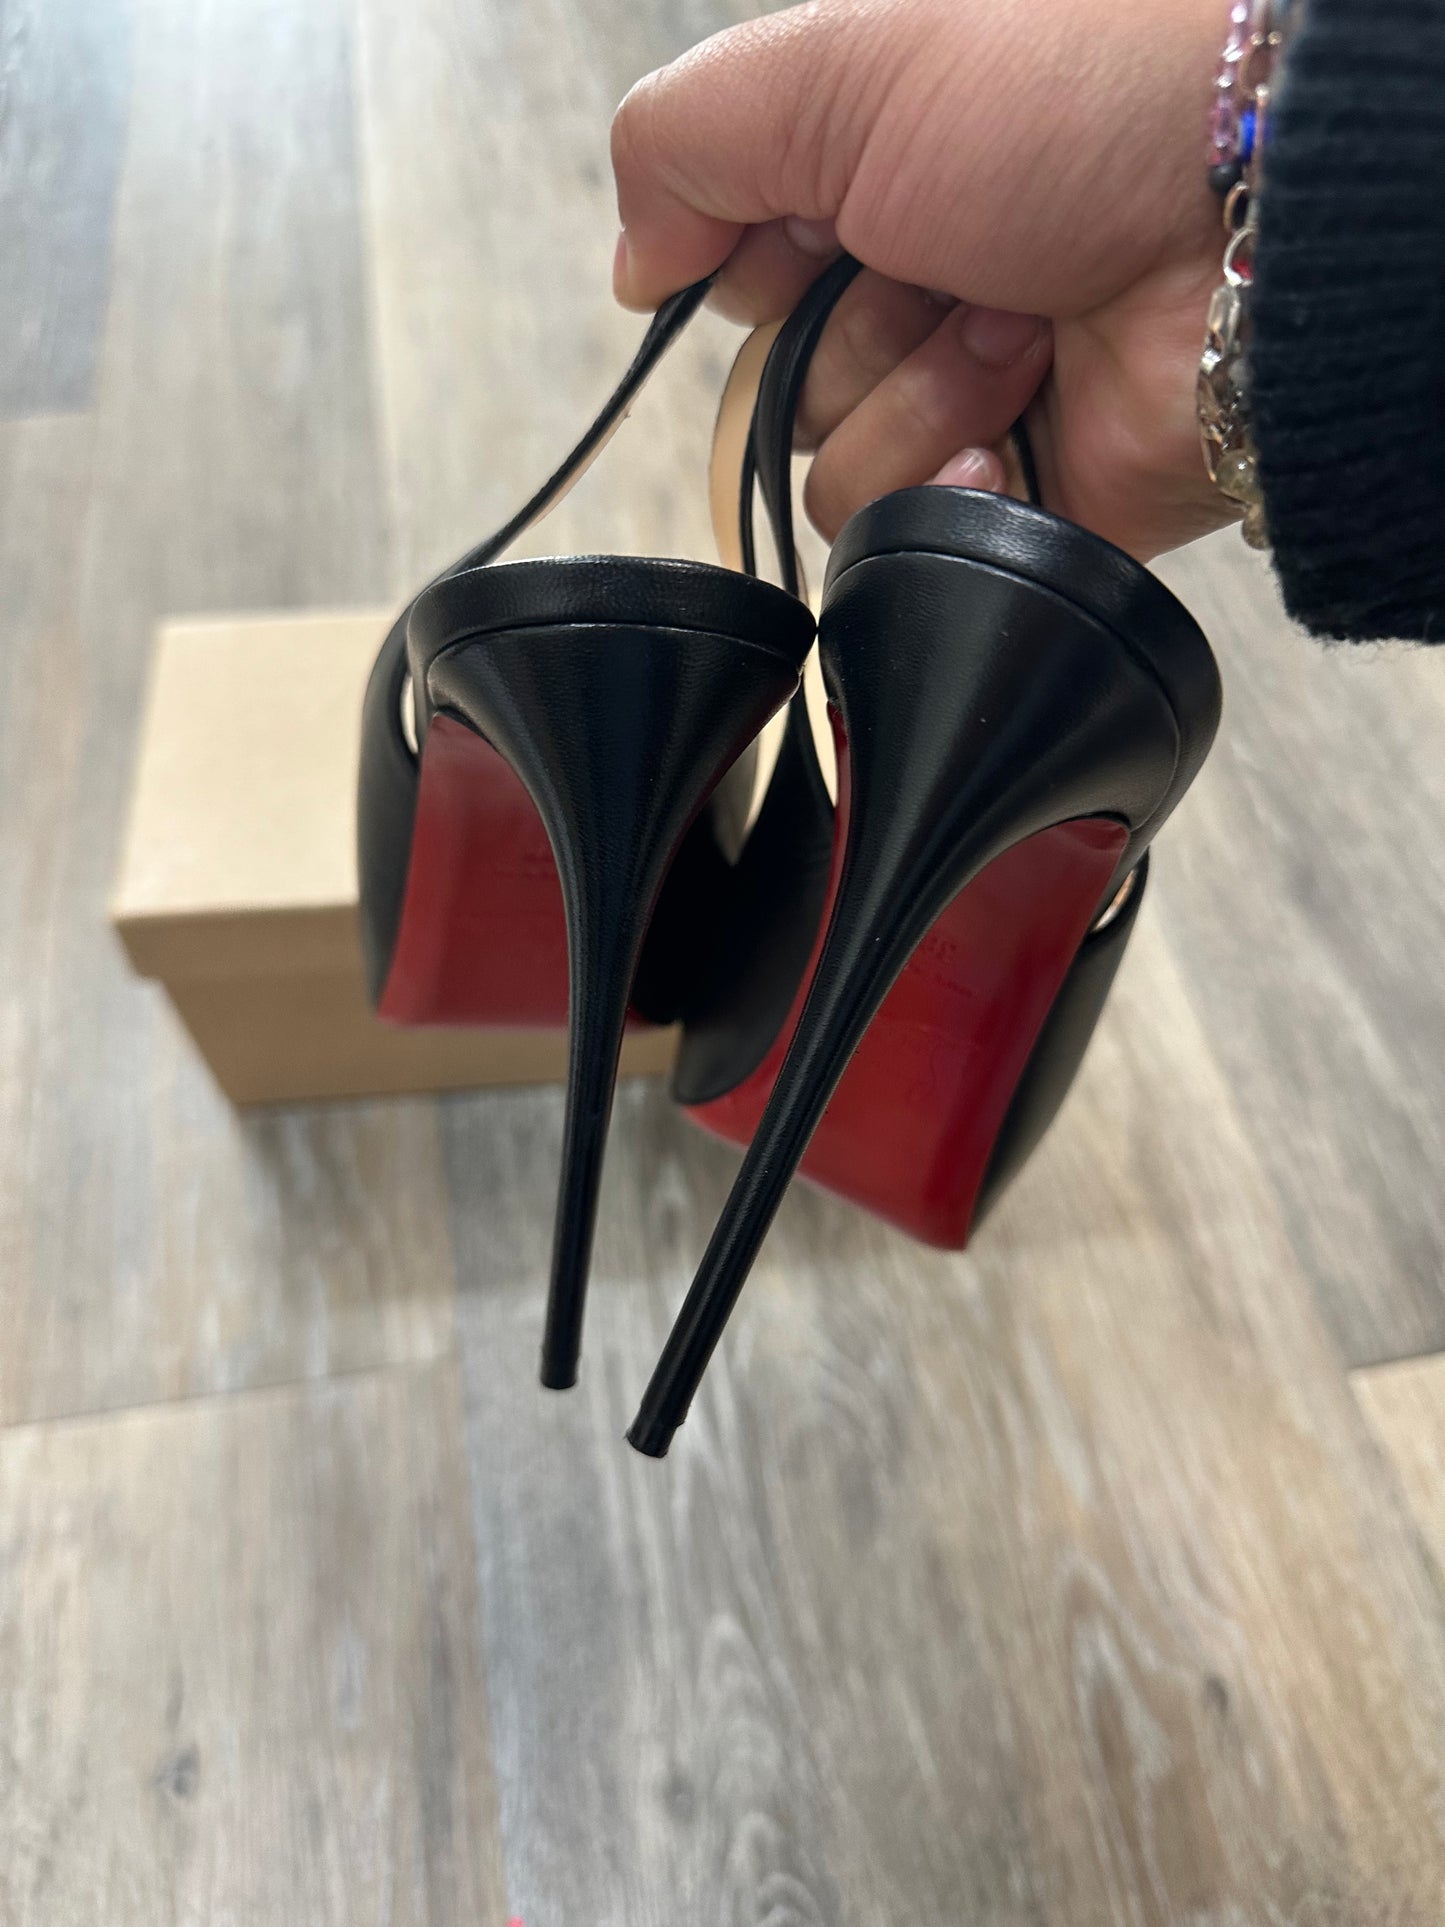 Shoes Luxury Designer By Christian Louboutin  Size: 8